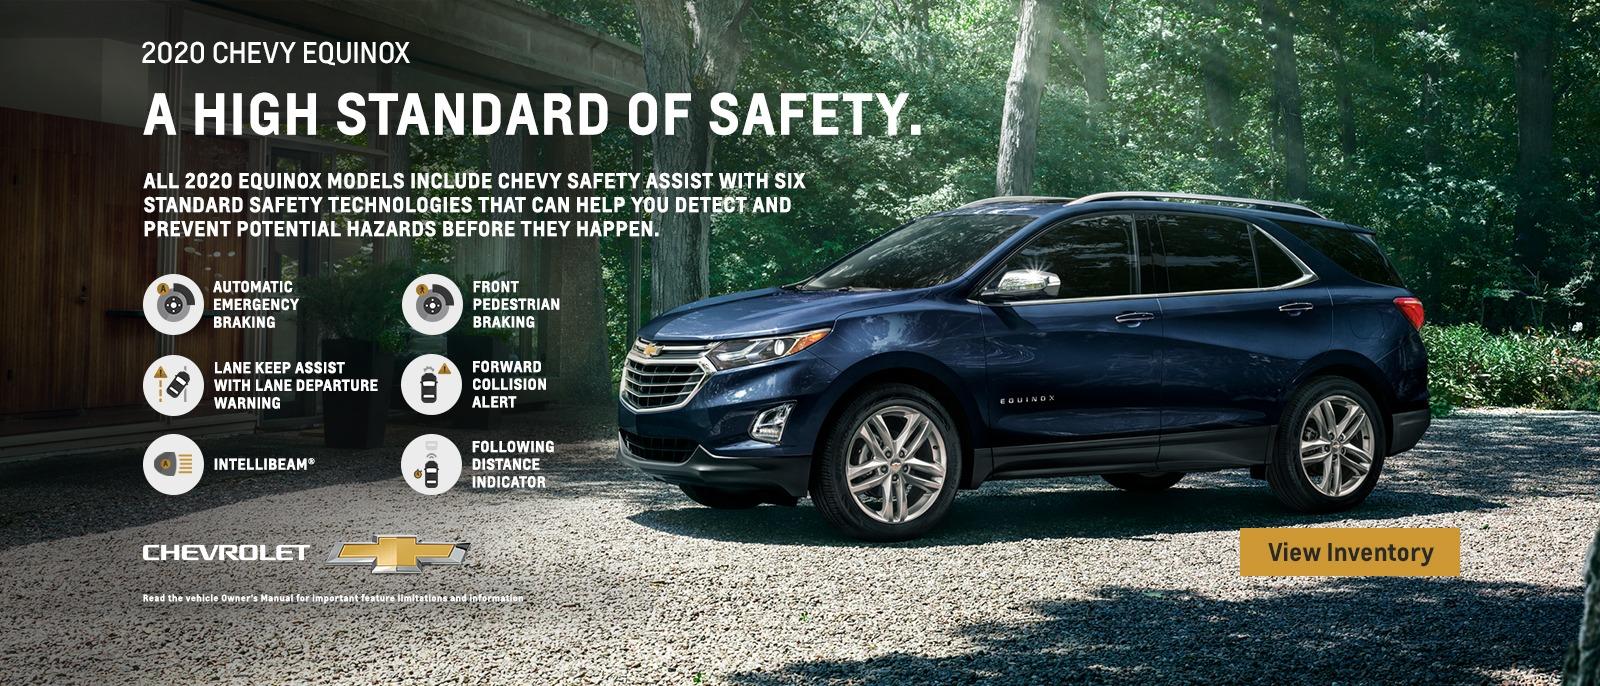 Safety Features for the 2020 Chevy Equinox